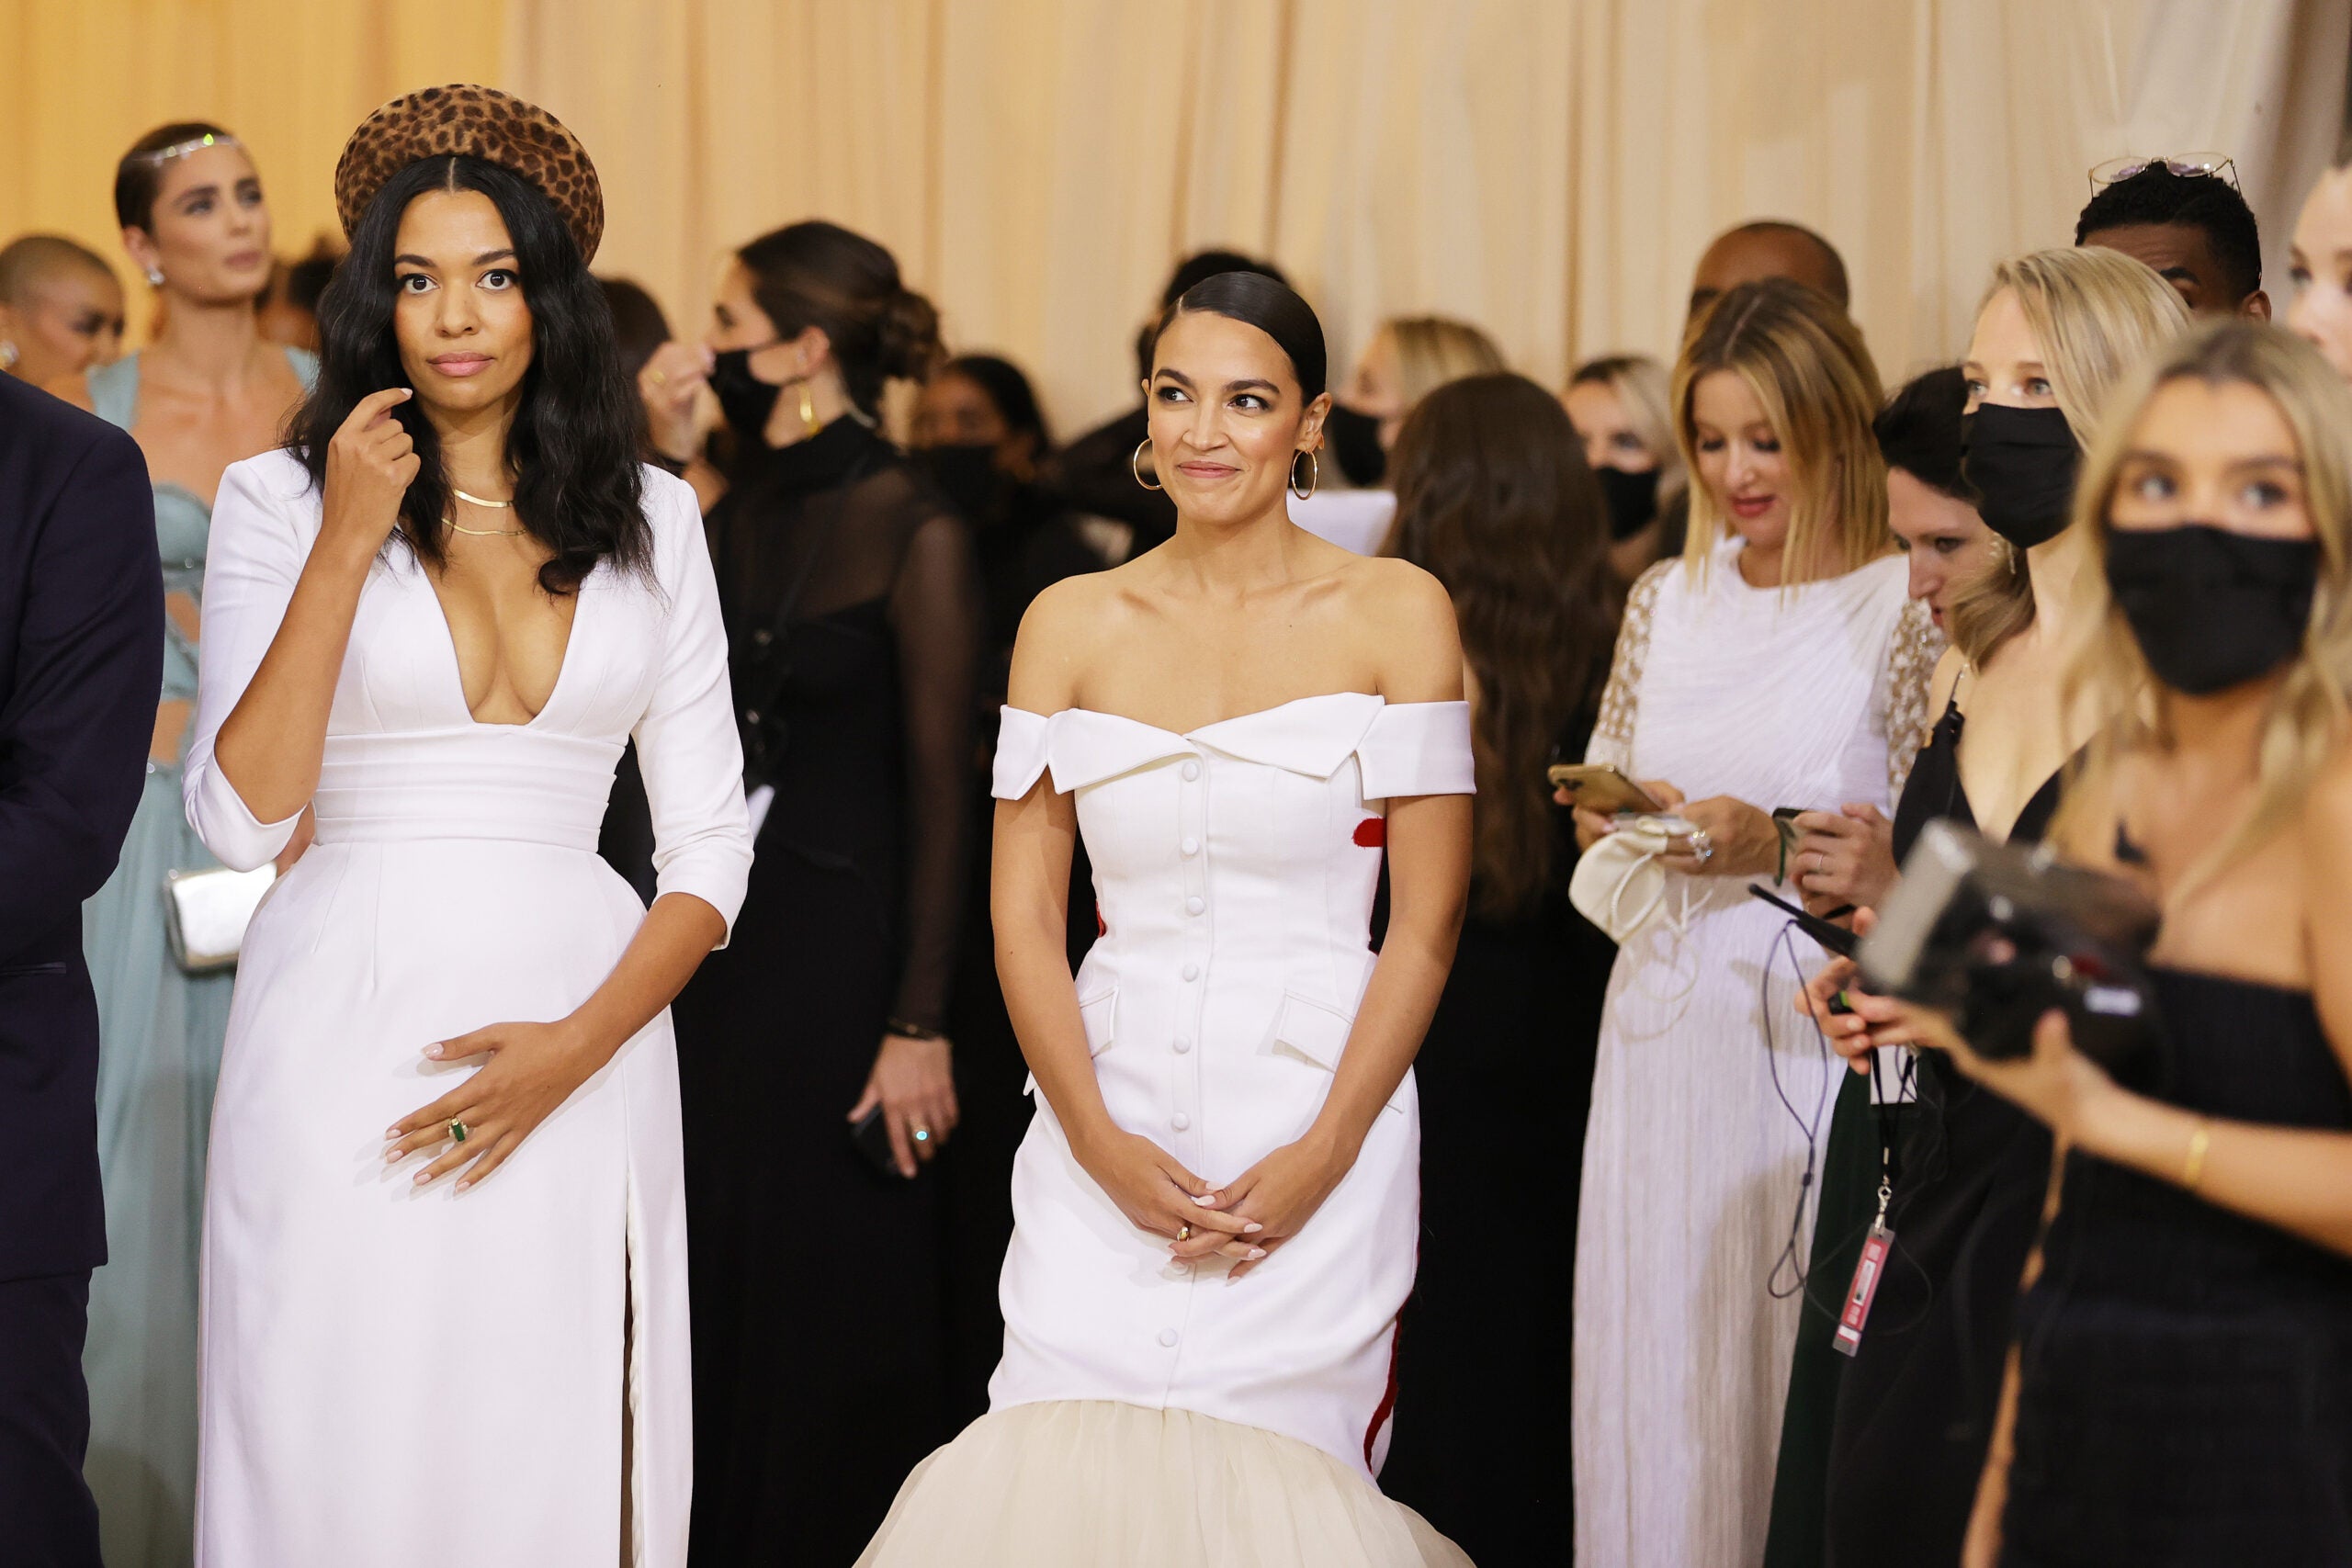 The Met Gala is full of rich people. Alexandria Ocasio-Cortez wore a dress with a message: 'Tax the Rich.'